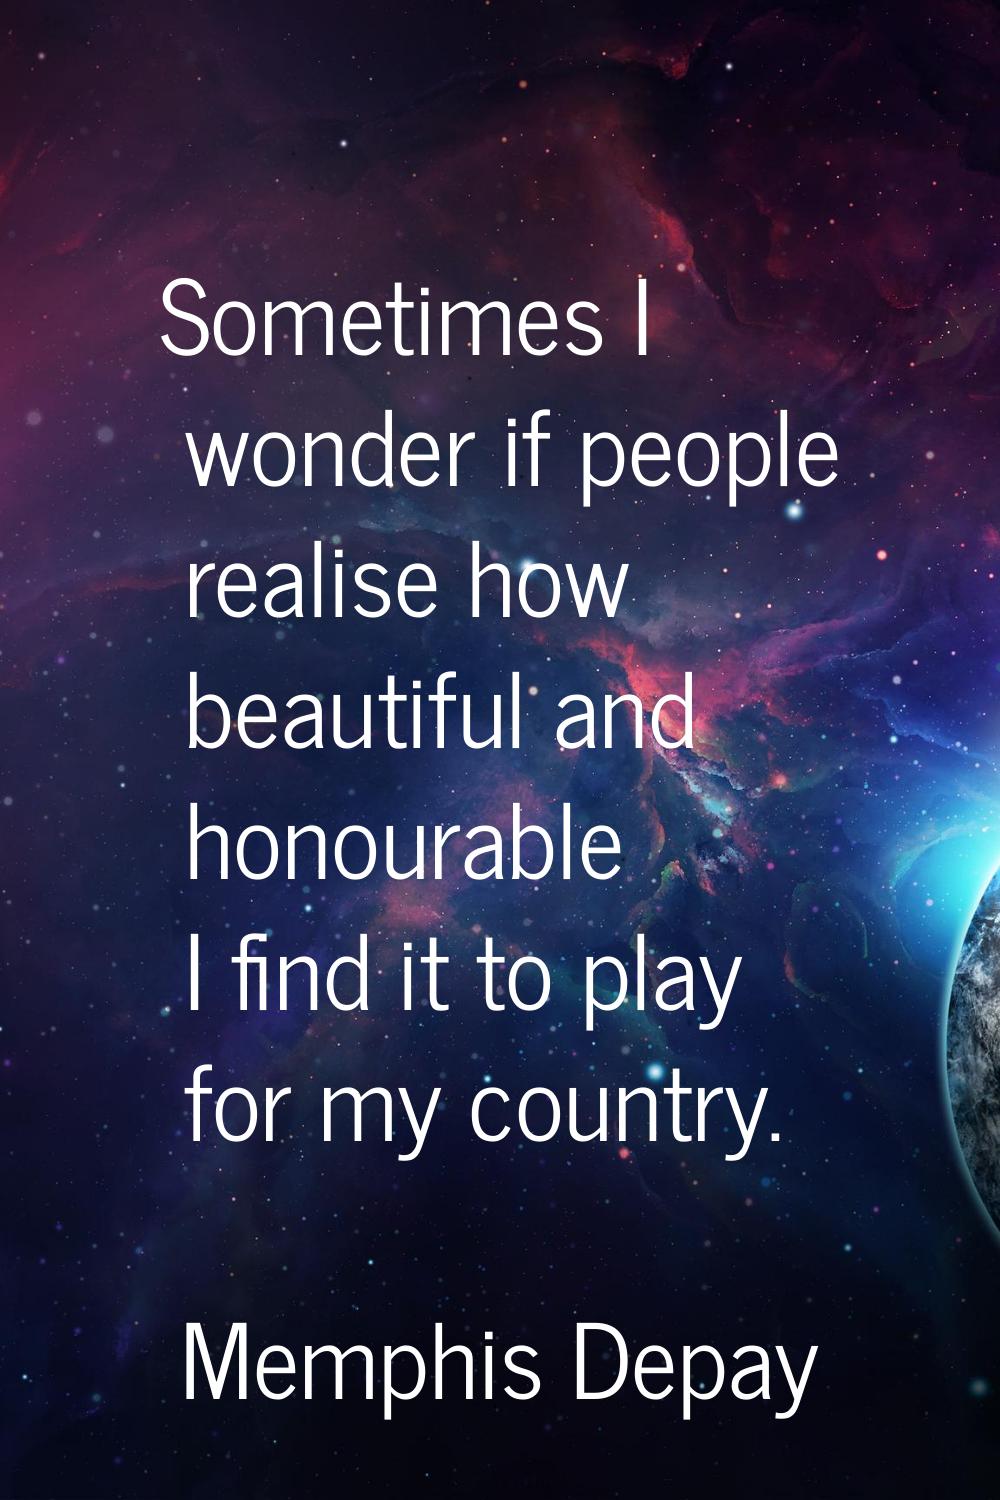 Sometimes I wonder if people realise how beautiful and honourable I find it to play for my country.